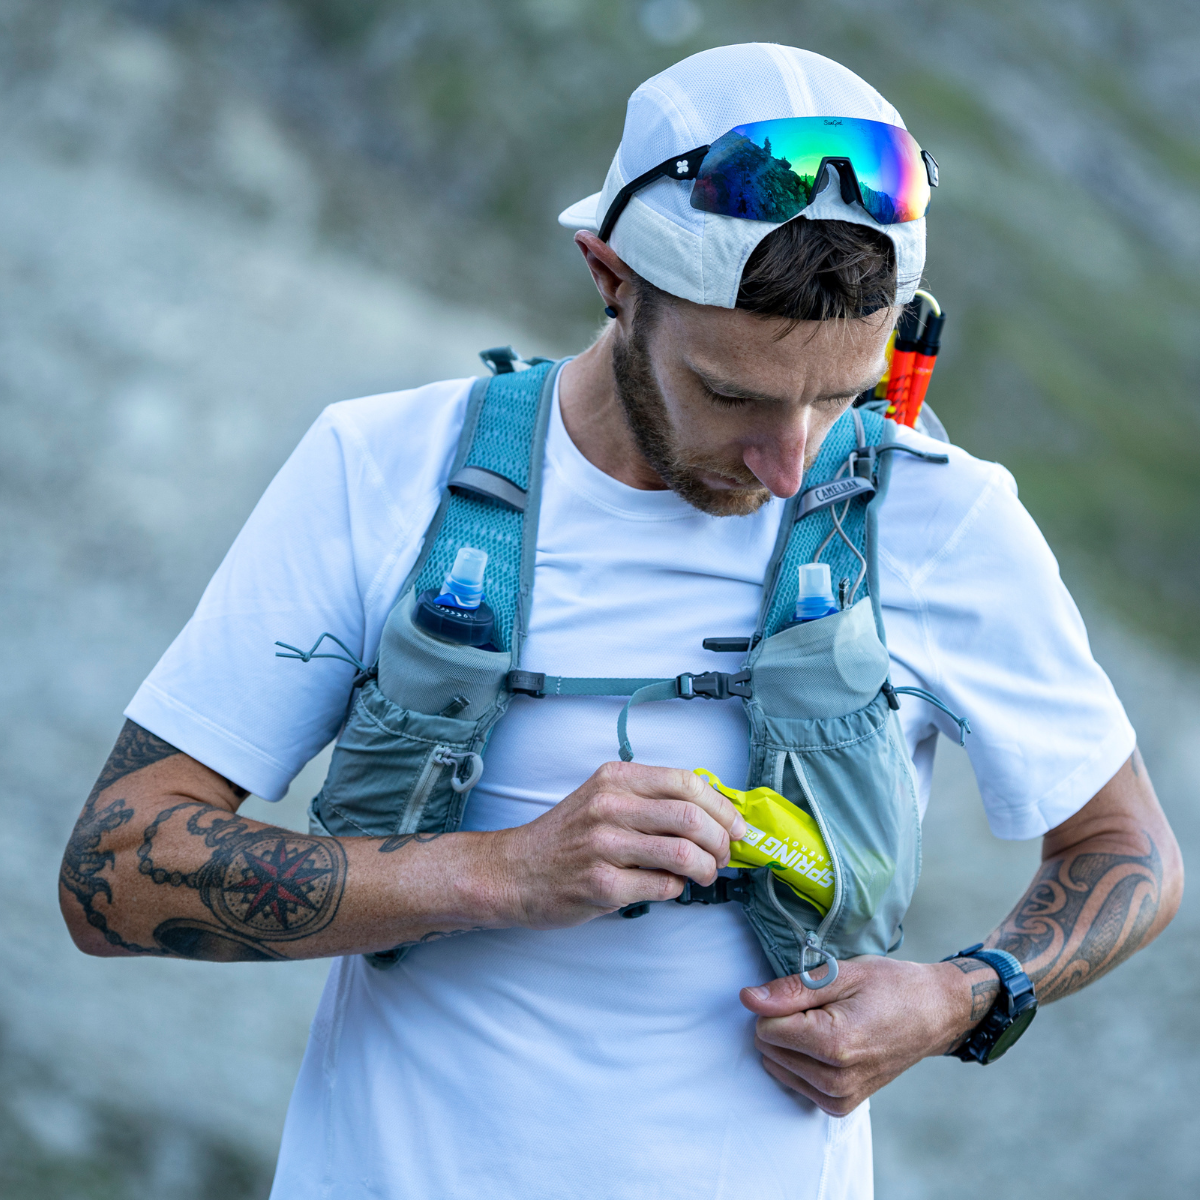 Hydration packs and water bottles